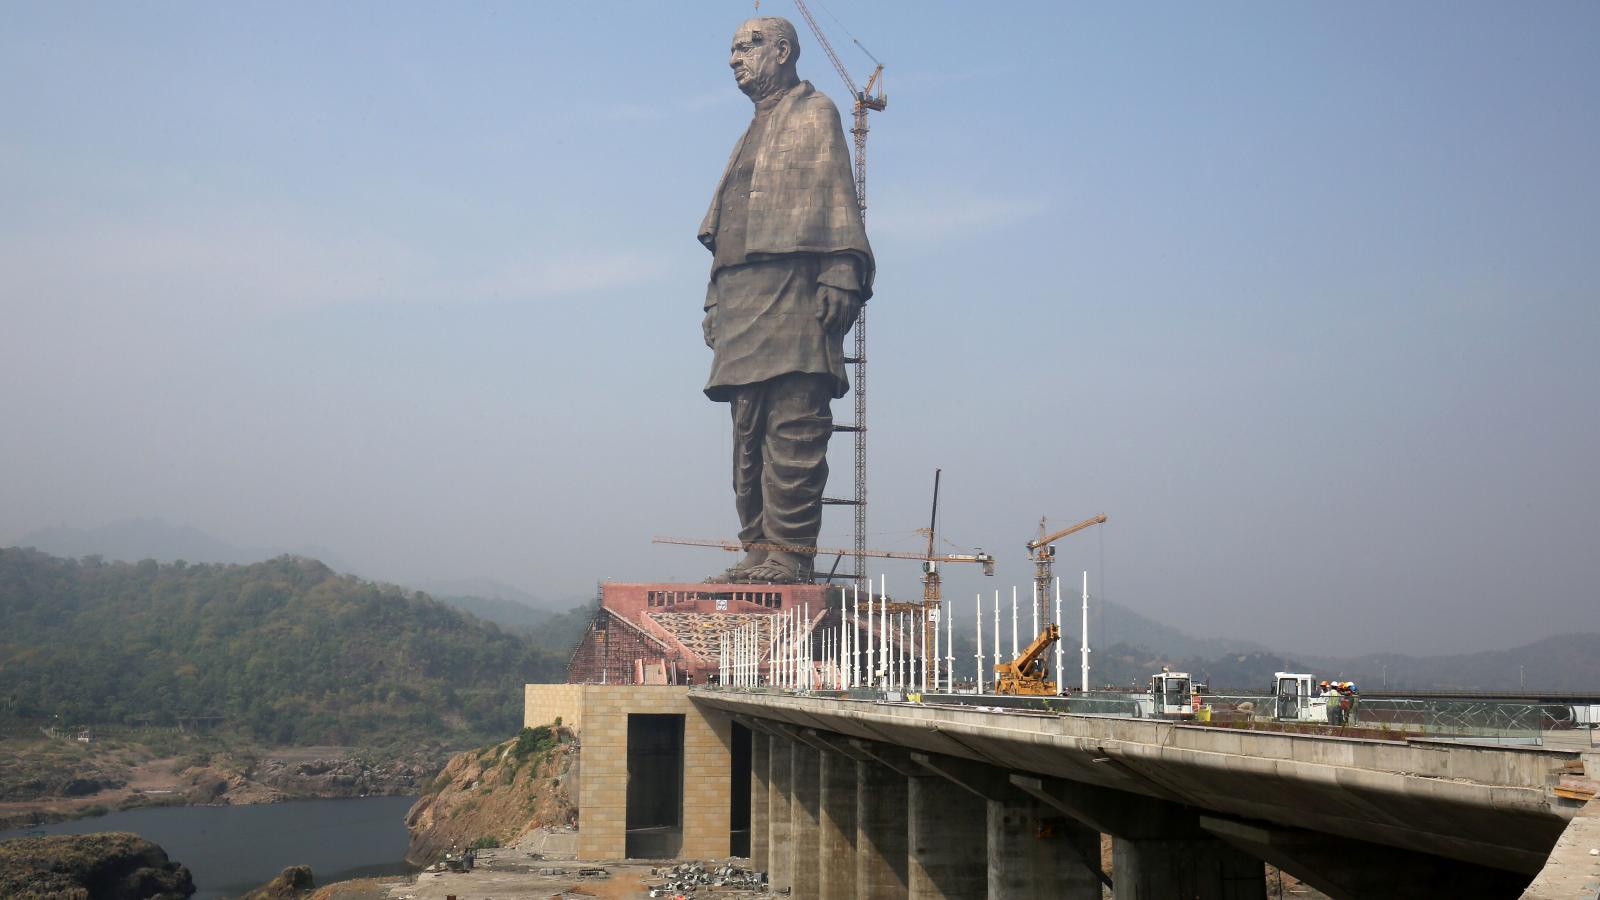 India now has the world's tallest statue, burnished